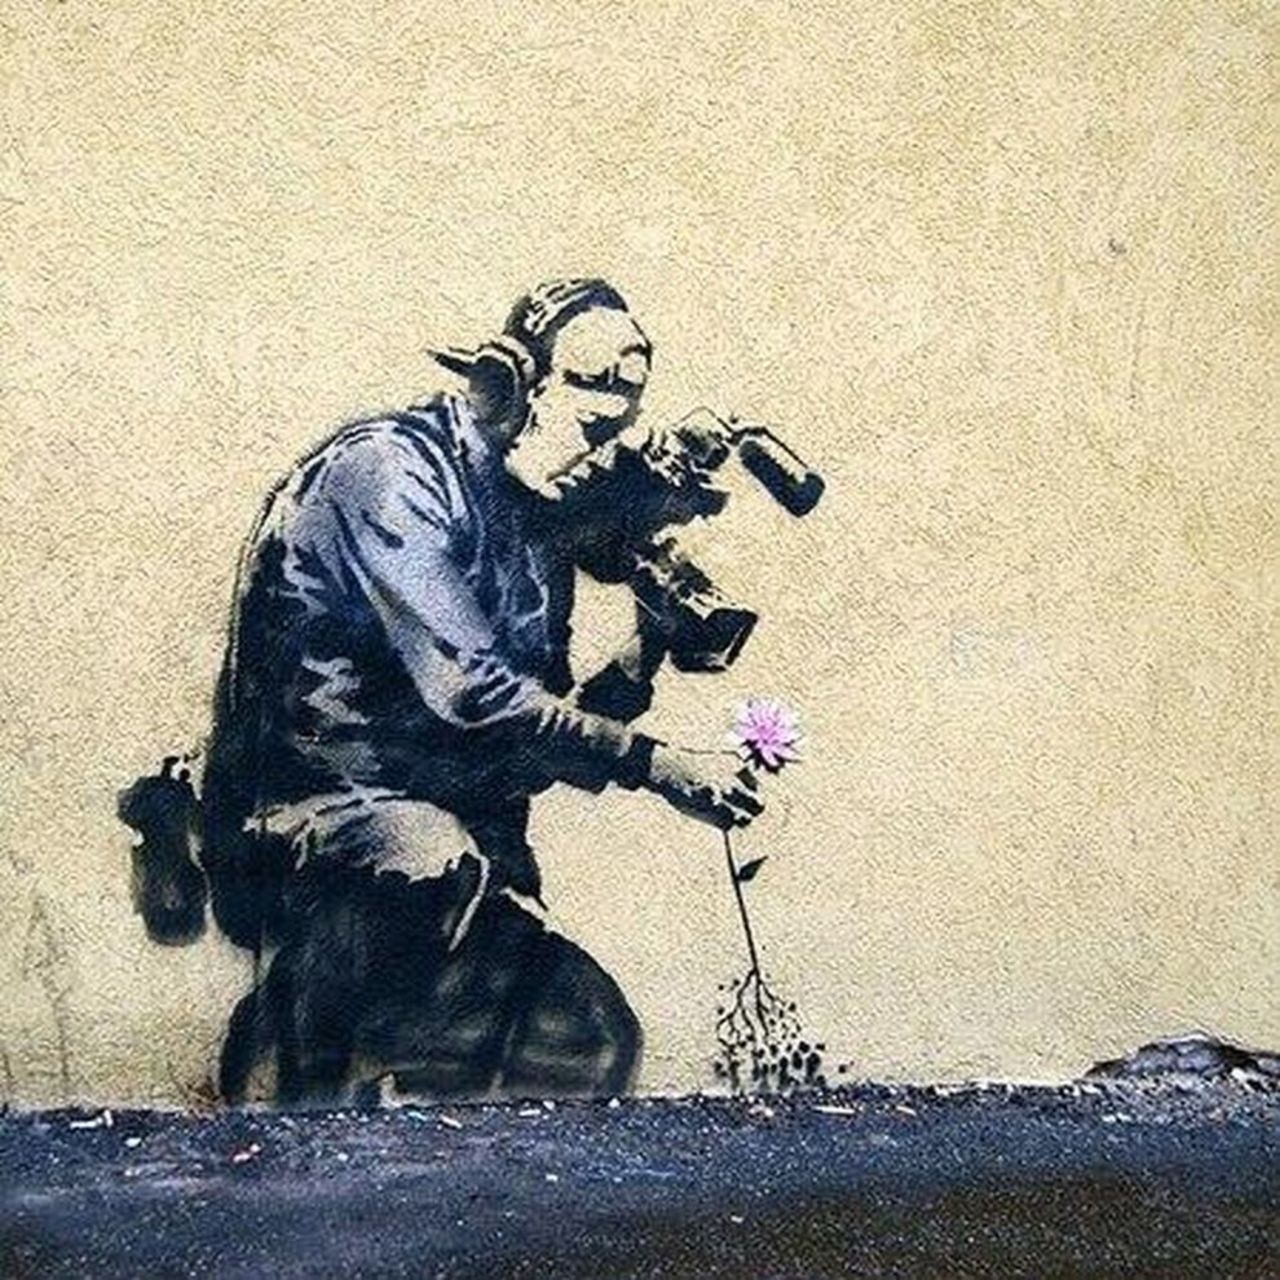 #StreetartSaturday An especially well done #Stencil #StreetArt making a political comment on nature and life. https://t.co/aQUy3jmdVu